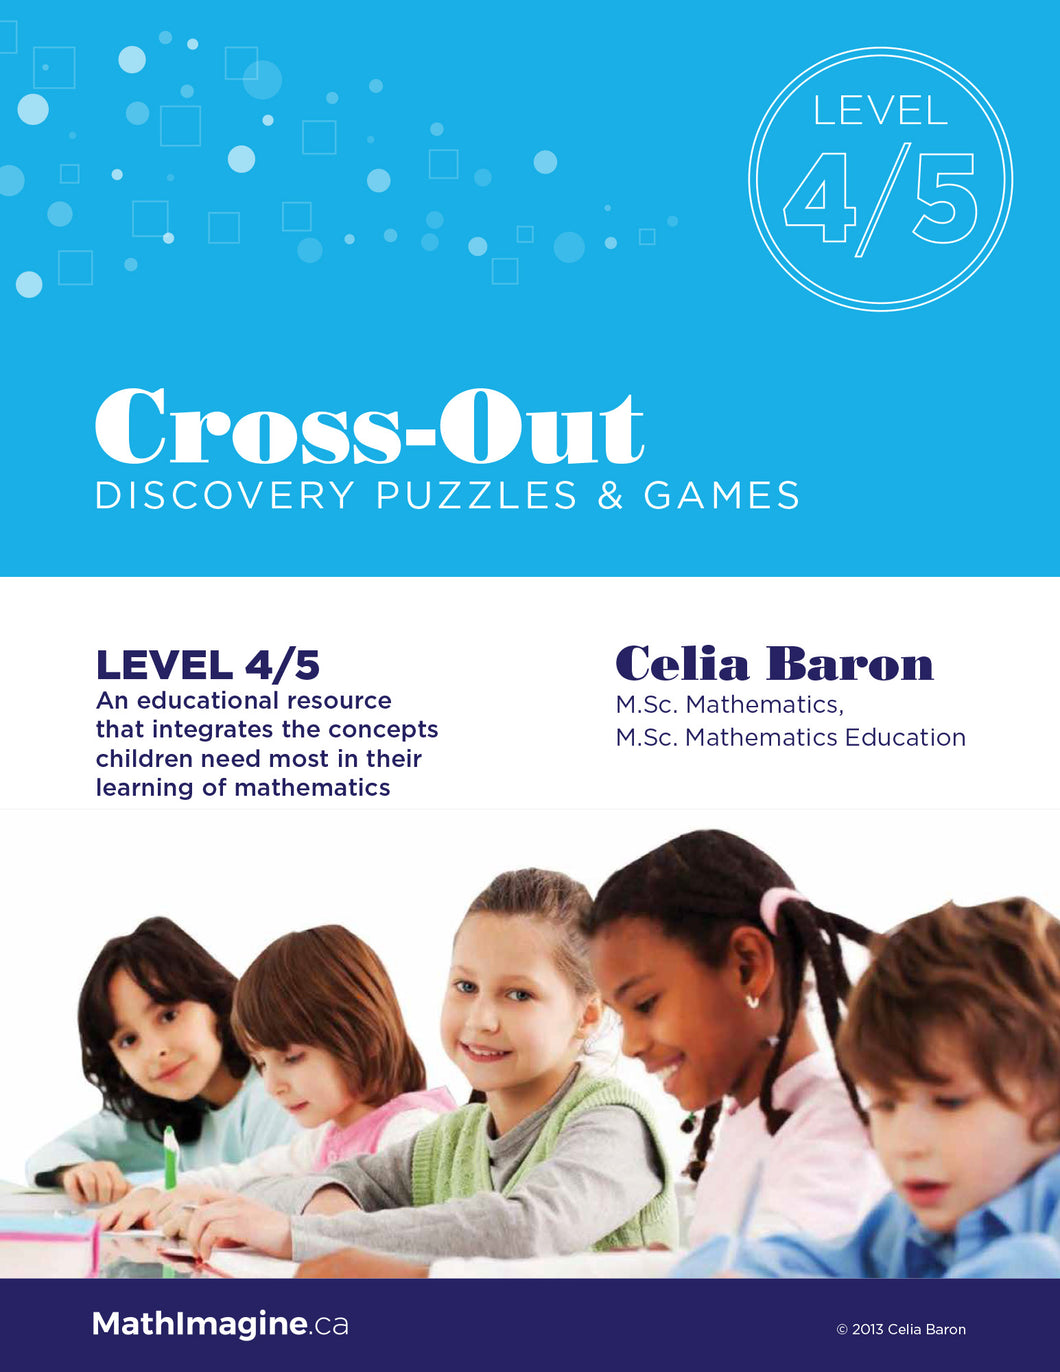 Level 4/5 - Cross-Out